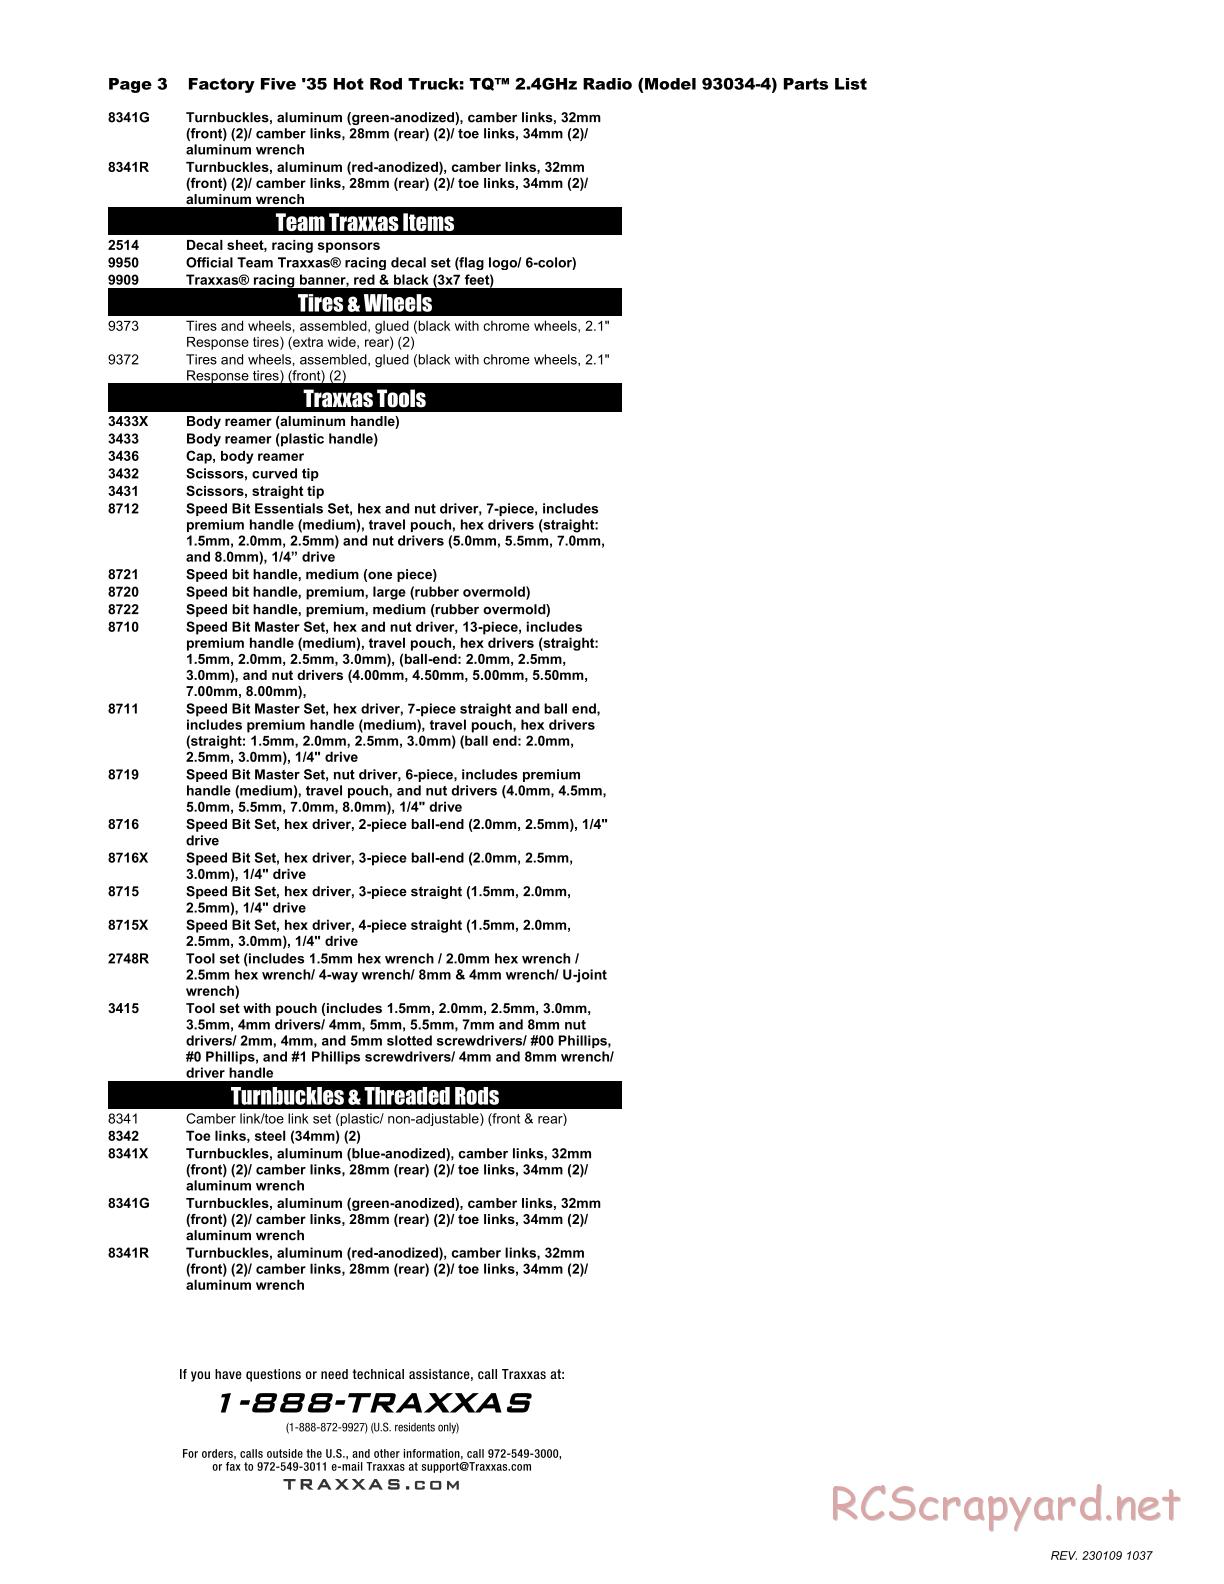 Traxxas - Hot Rod 1935 Truck (2021) - Parts List - Page 3